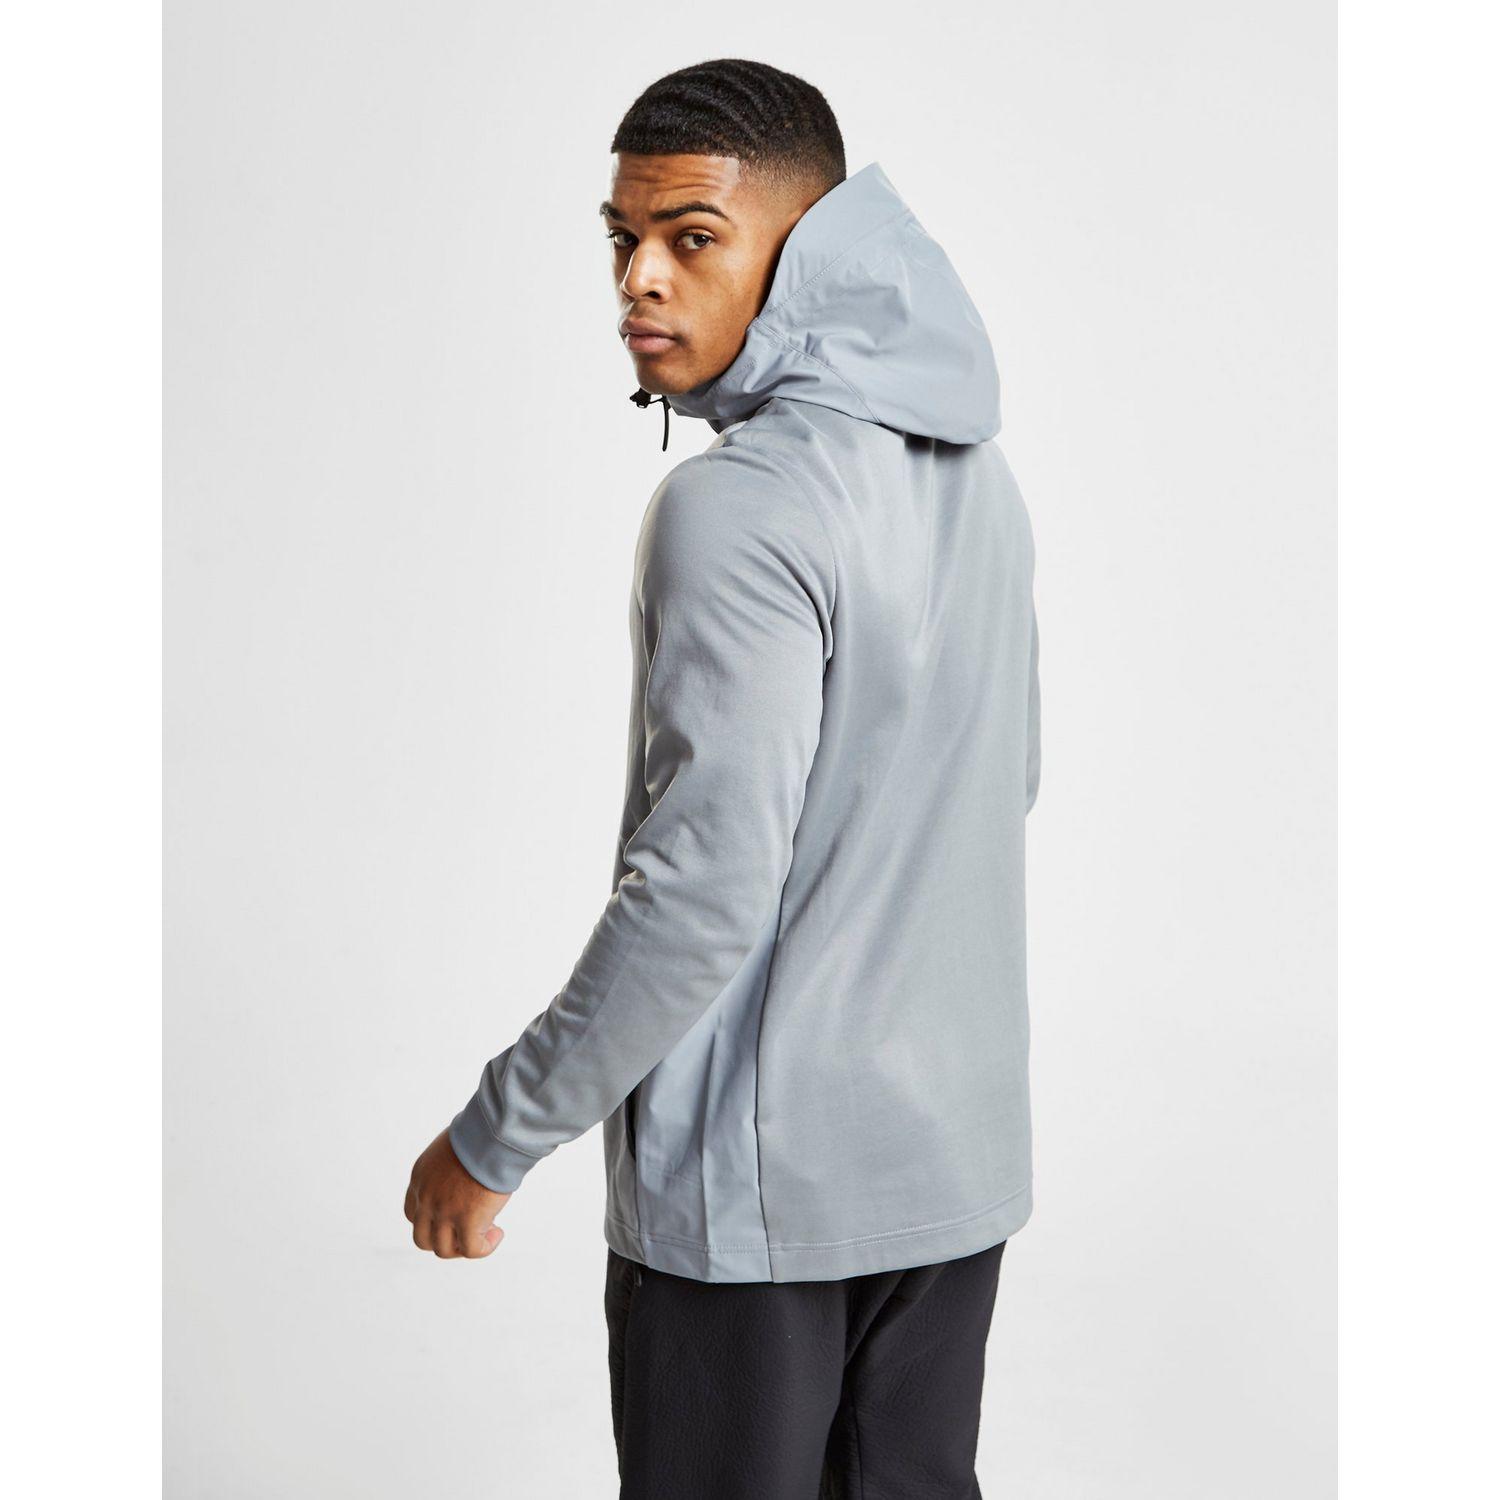 Nike Synthetic Air Max Poly 1/2 Zip Hoodie in Grey (Gray) for Men - Lyst